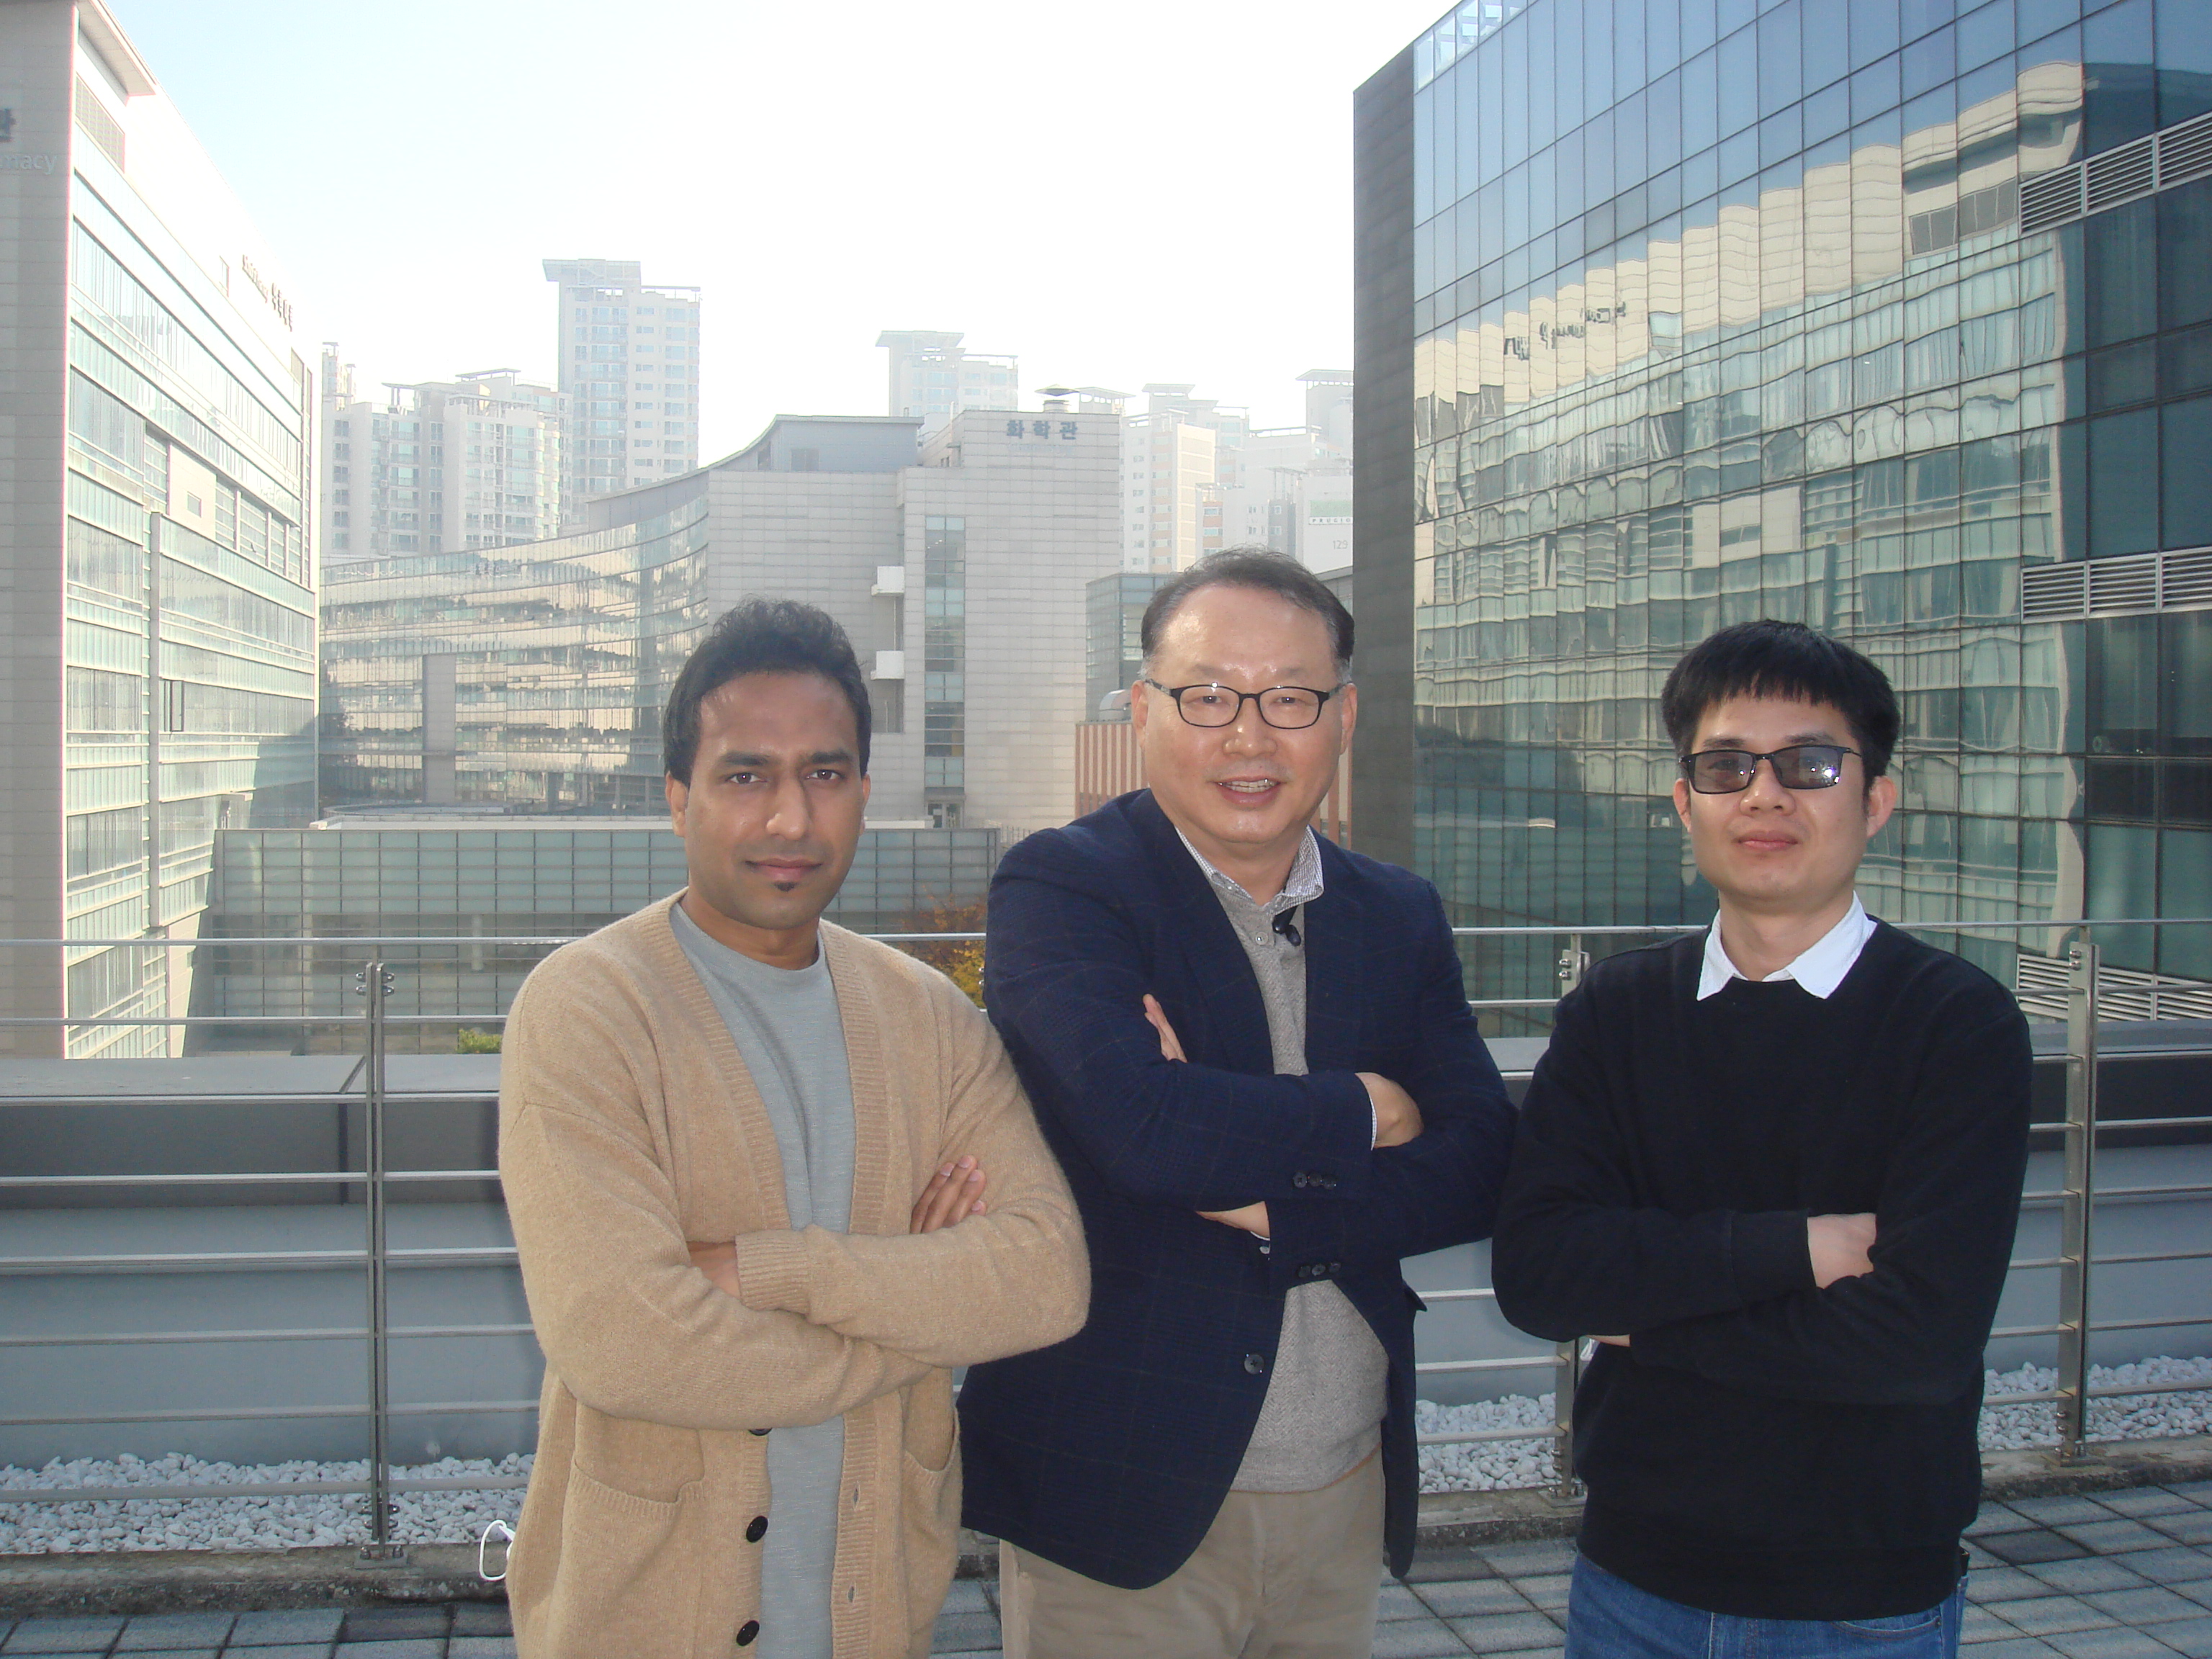 Figure 3. (left to right) Ashwani Kumar (1st author), Prof. Hyoyoung Lee (corresponding author), and Viet Quoc Bui (co-author).